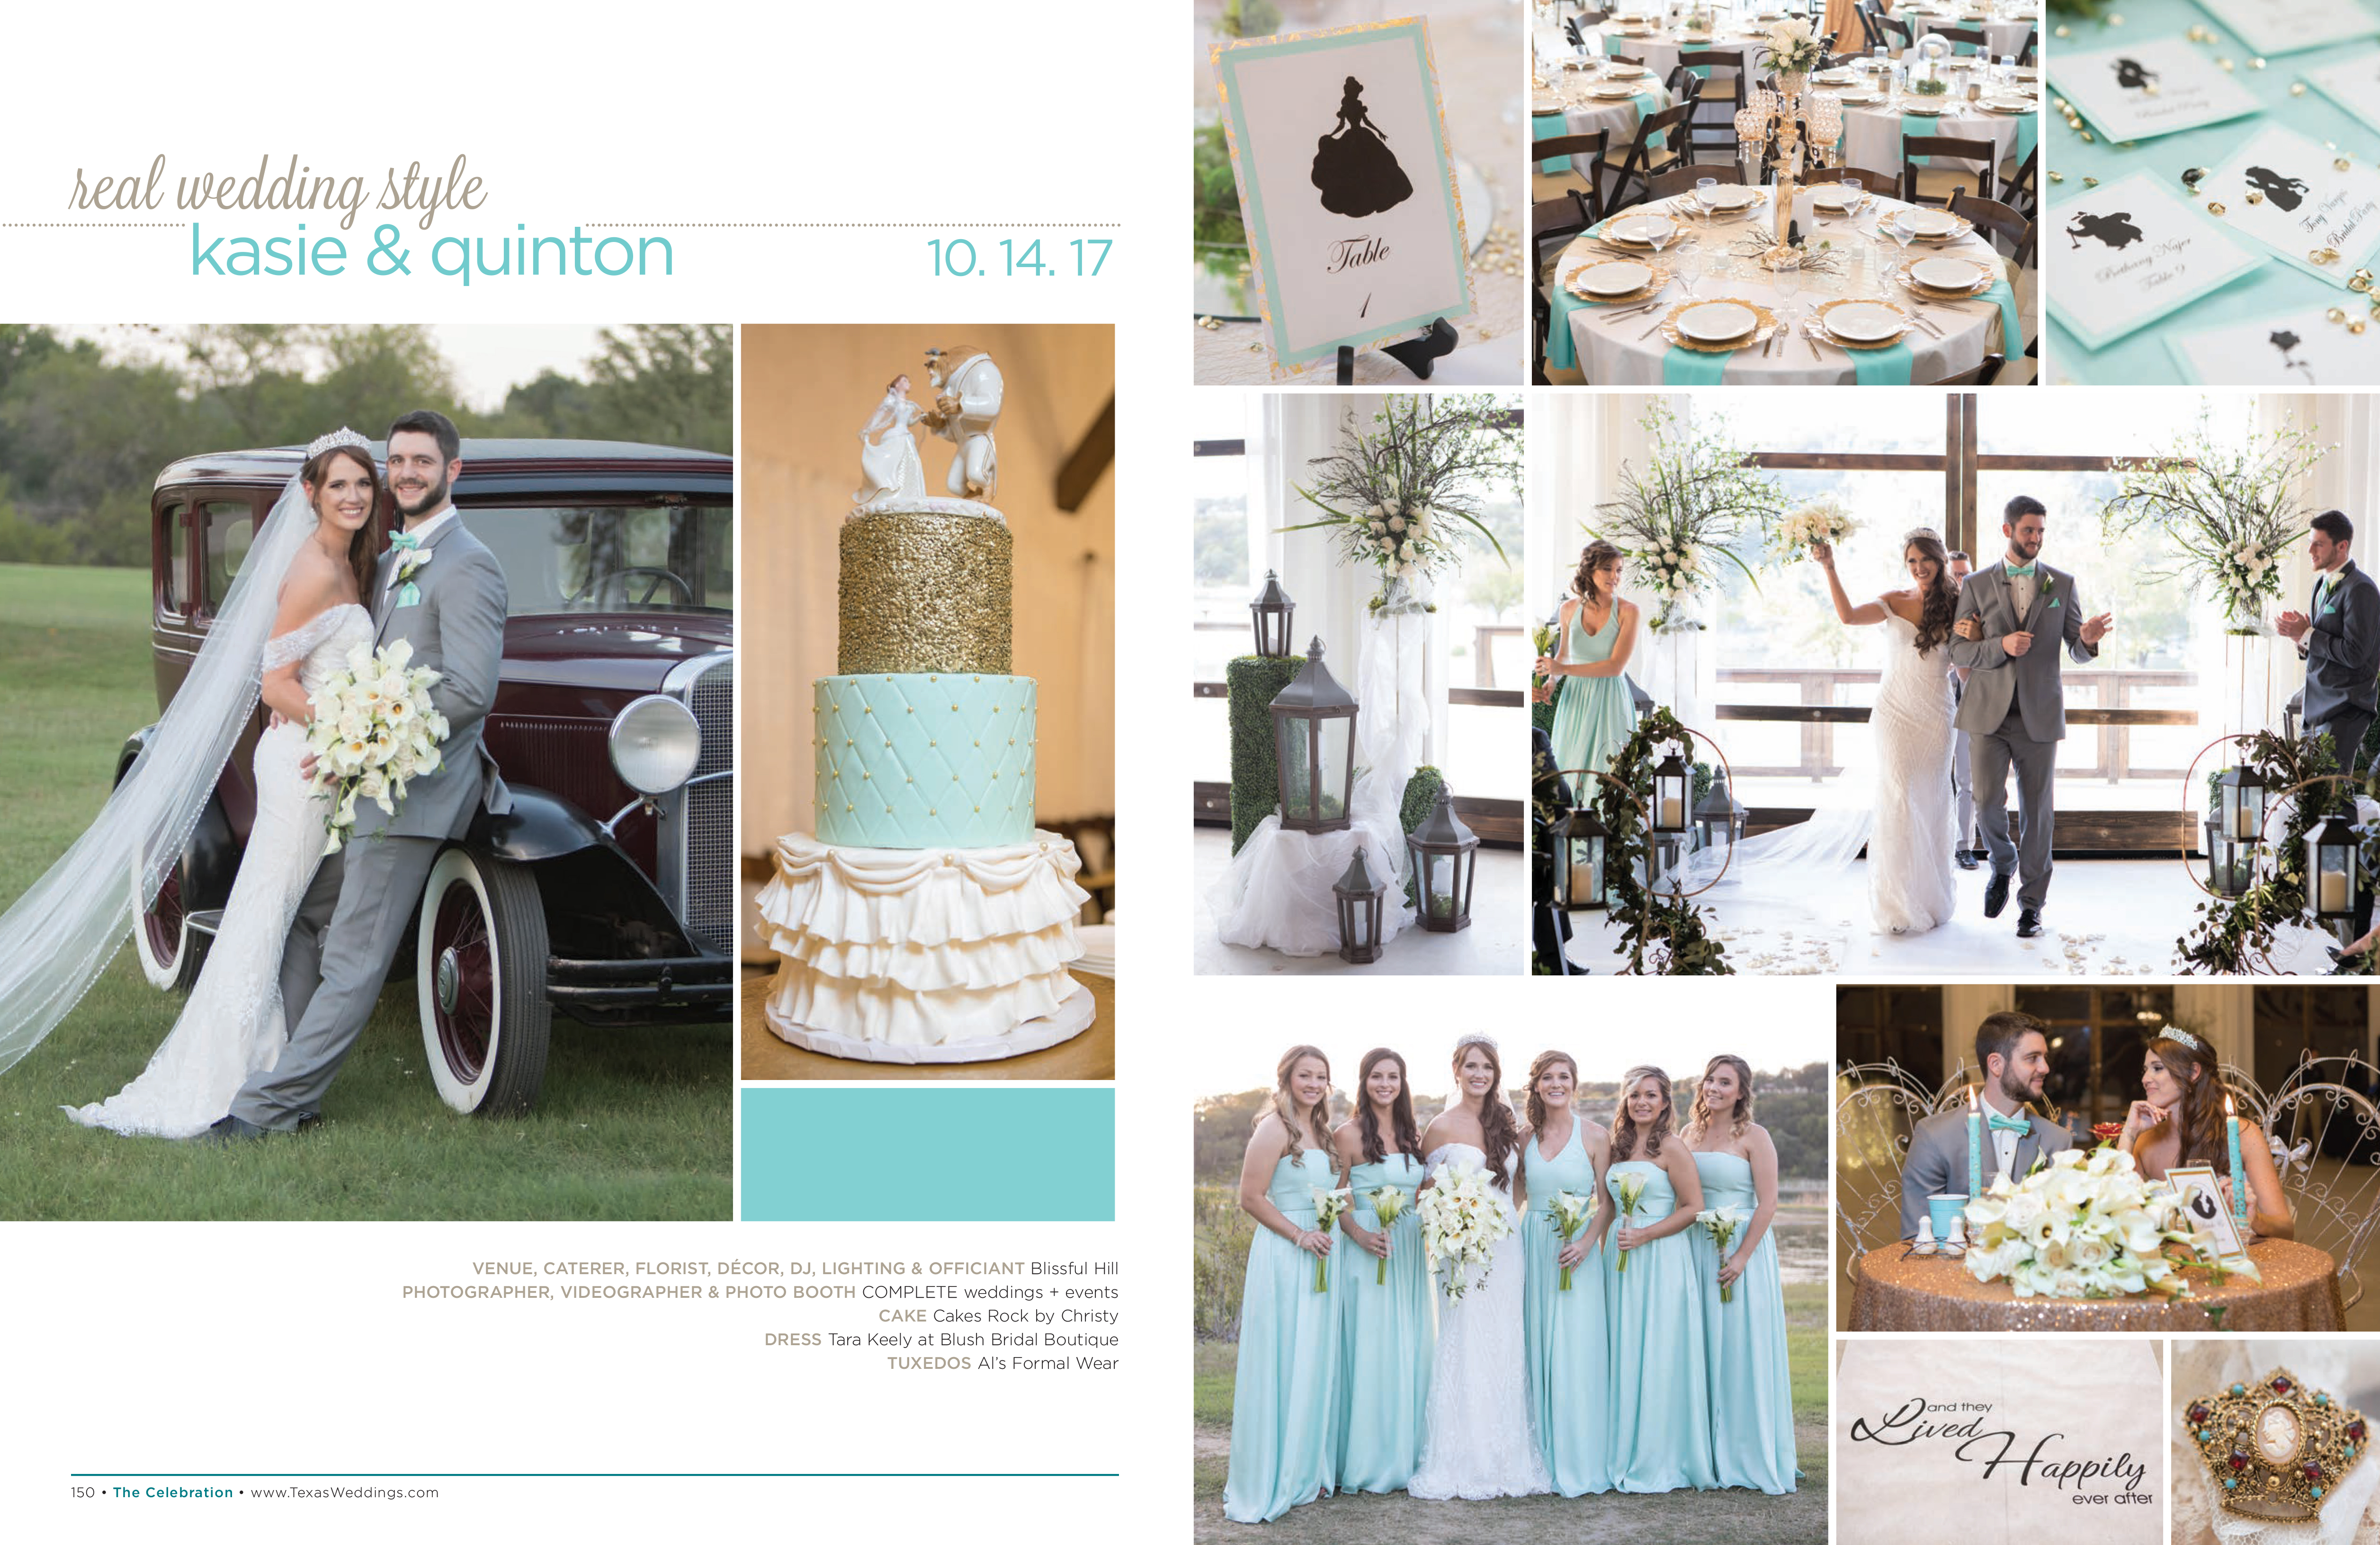 Kasie & Quinton in their Real Wedding Page in the Spring/Summer 2018 Texas Wedding Guide